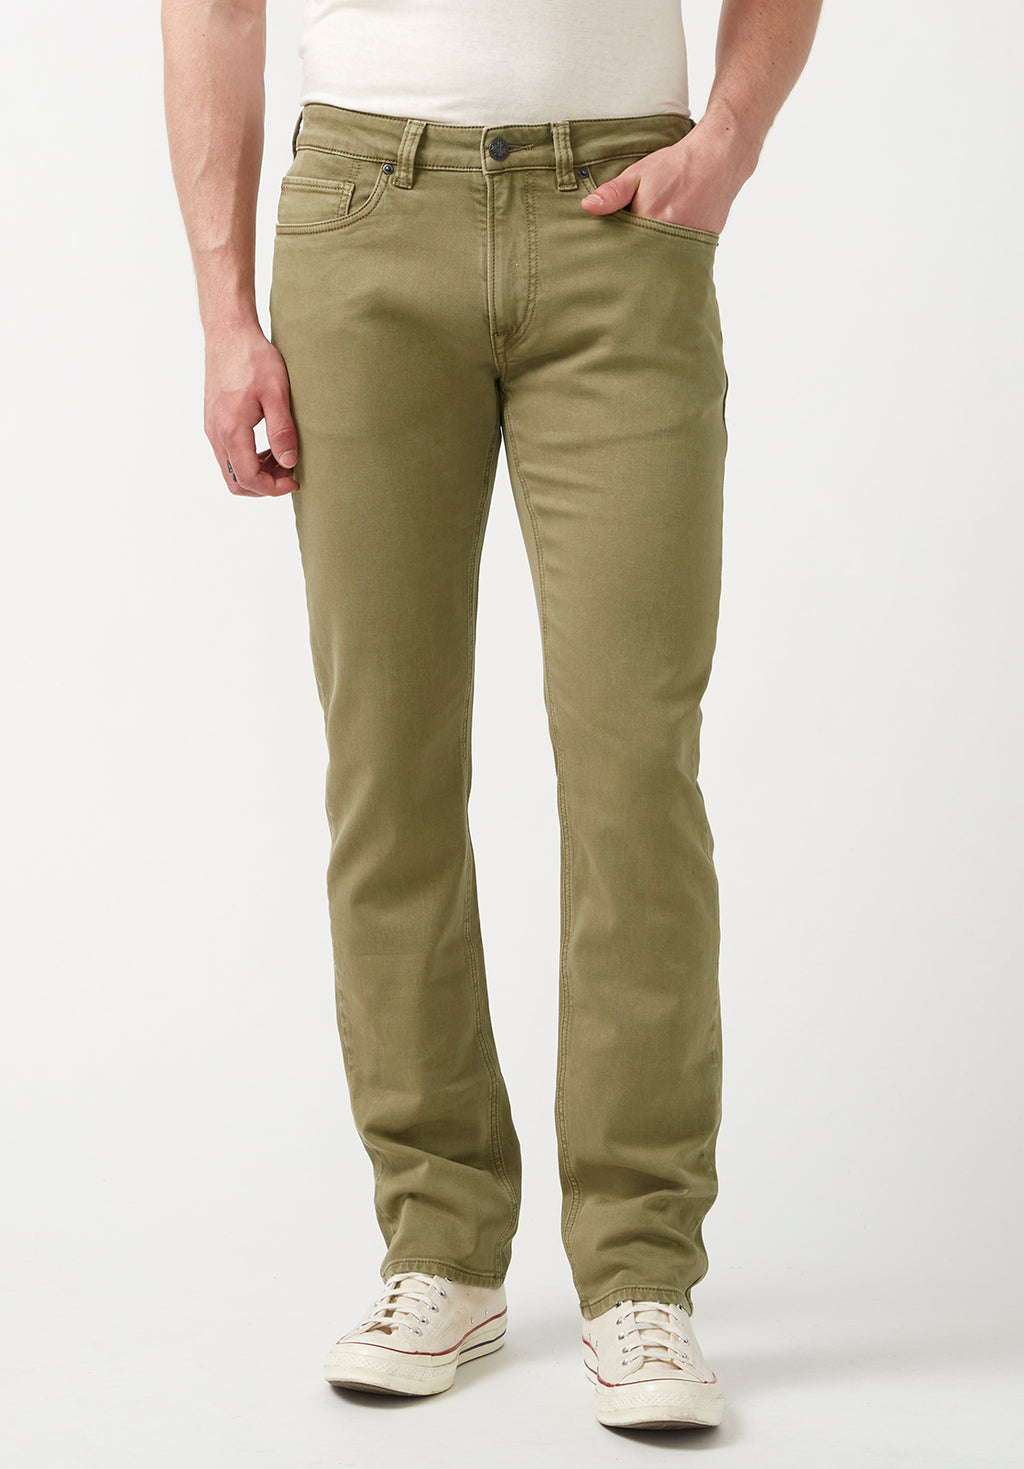 Buy Speckled Fleece Jogger with External Drawcord Olive For Men